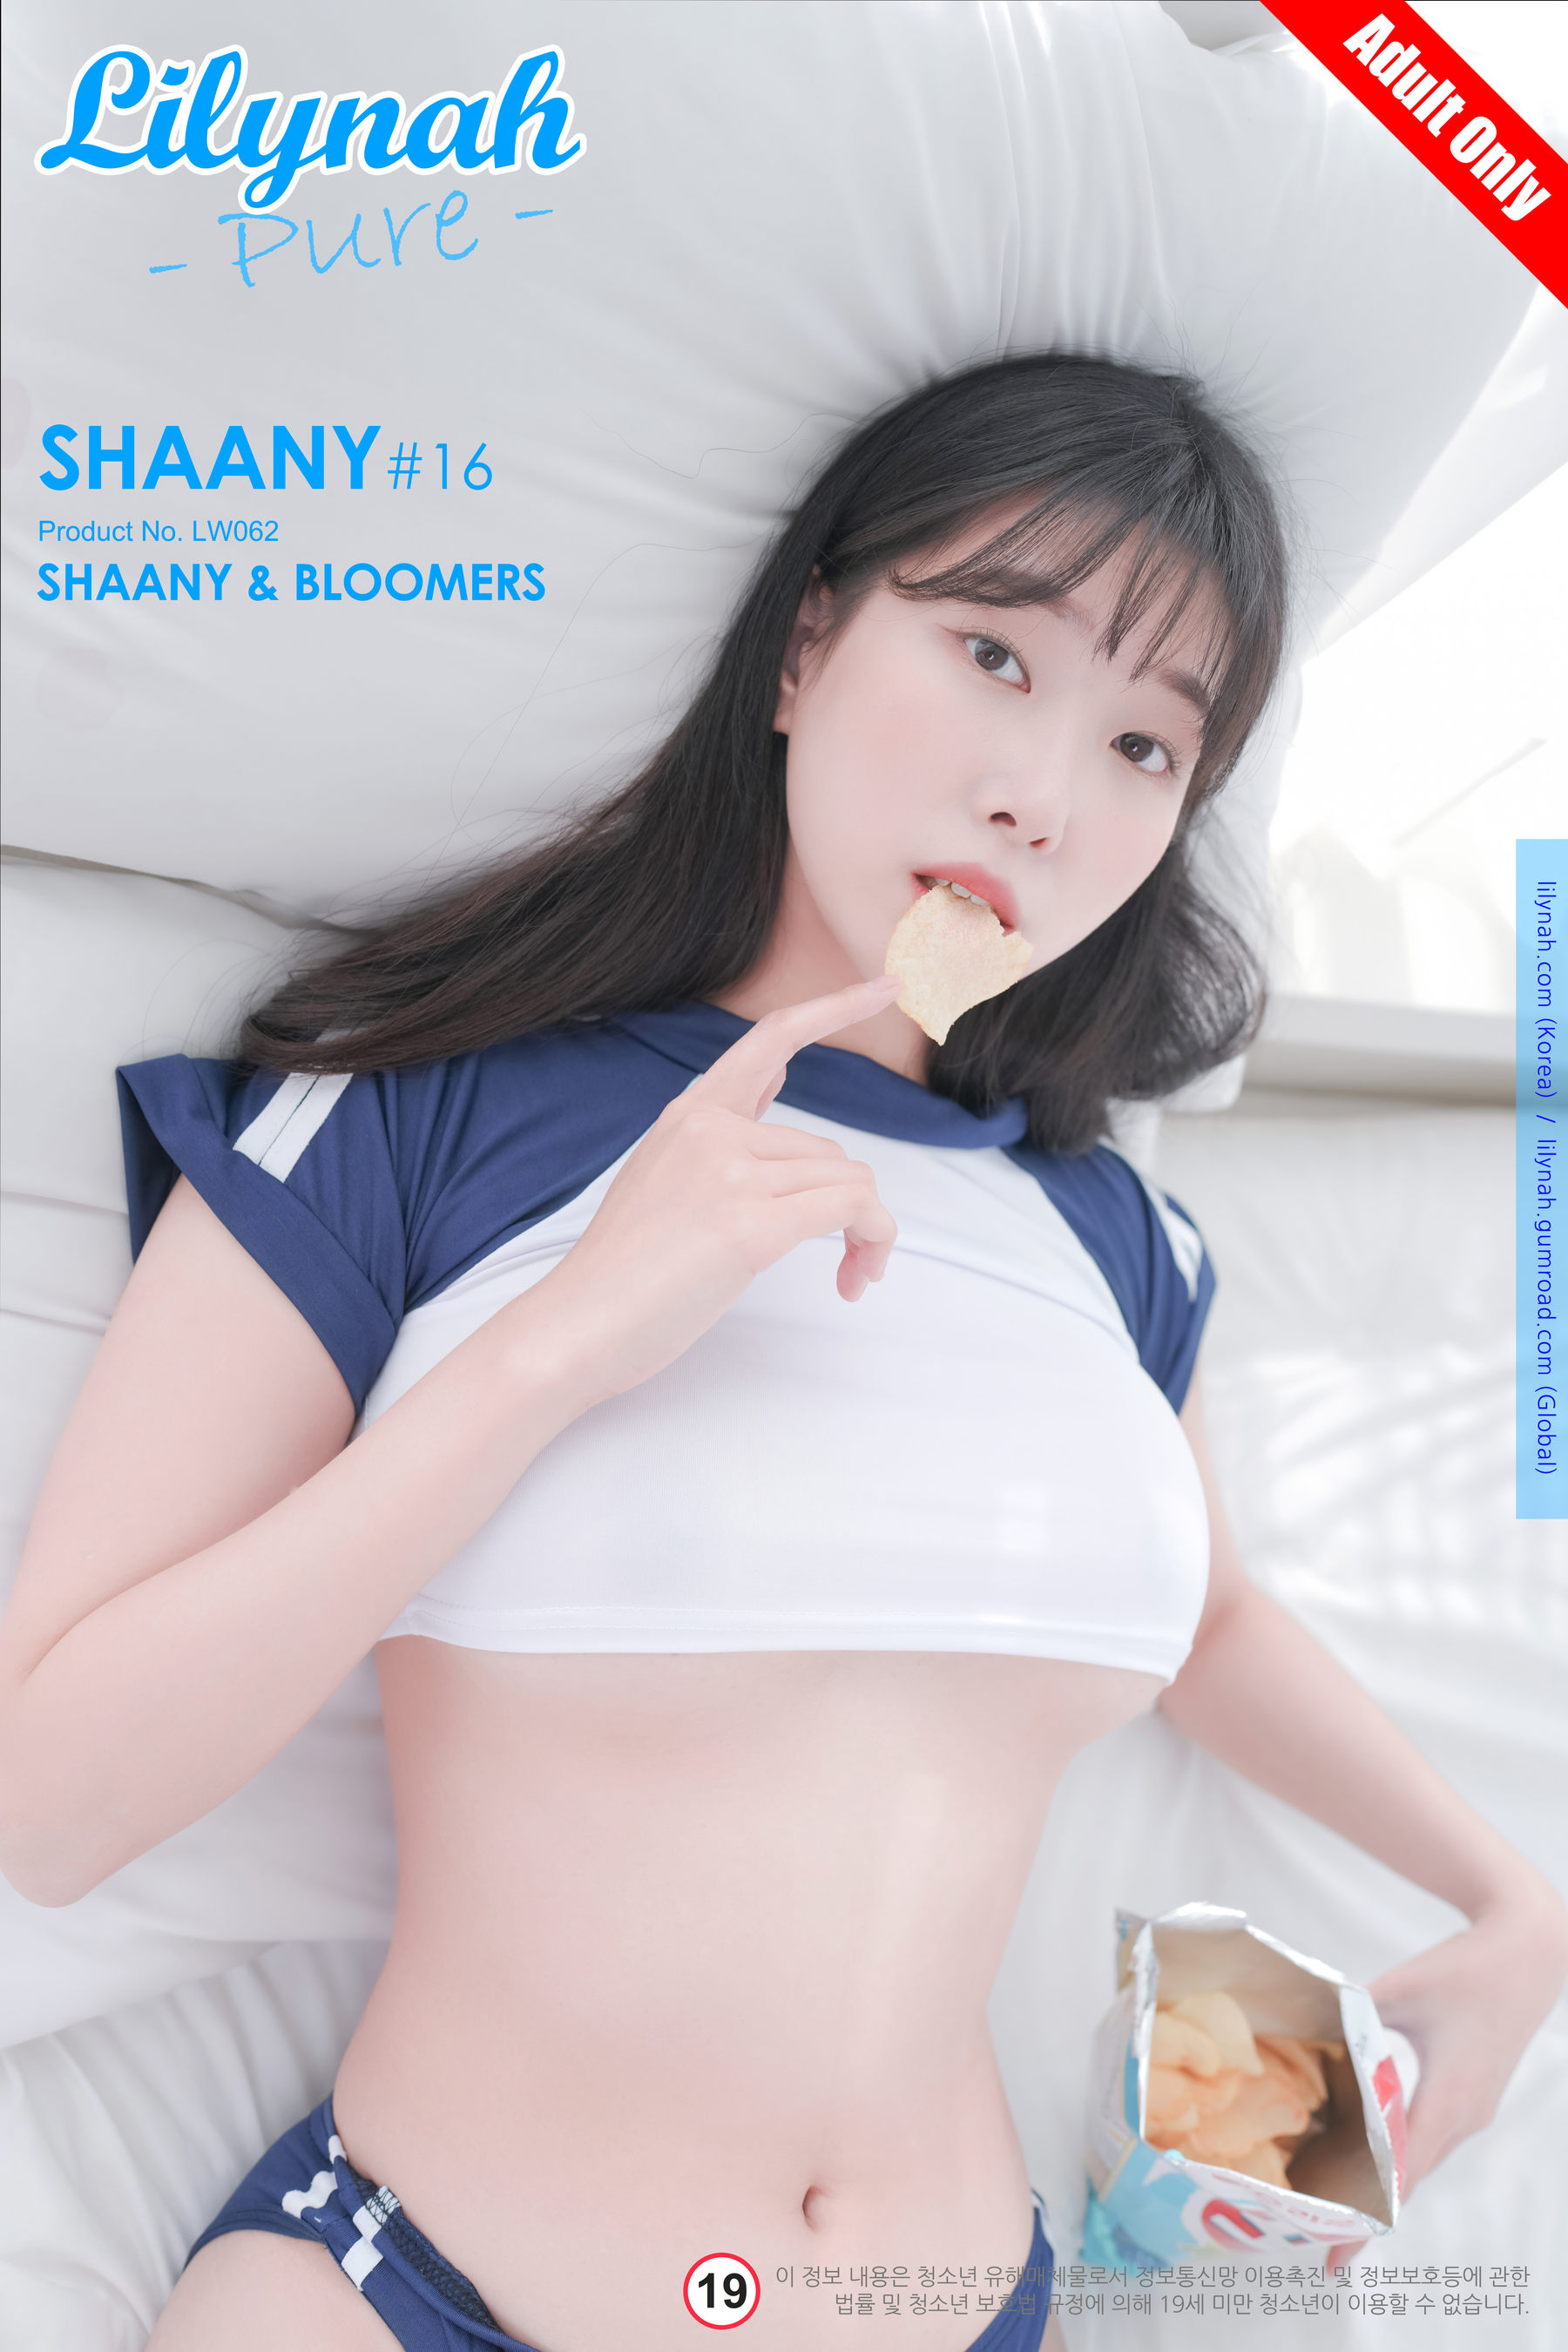 [Lilynah] Shaany - Vol.16 Shaany & Bloomers